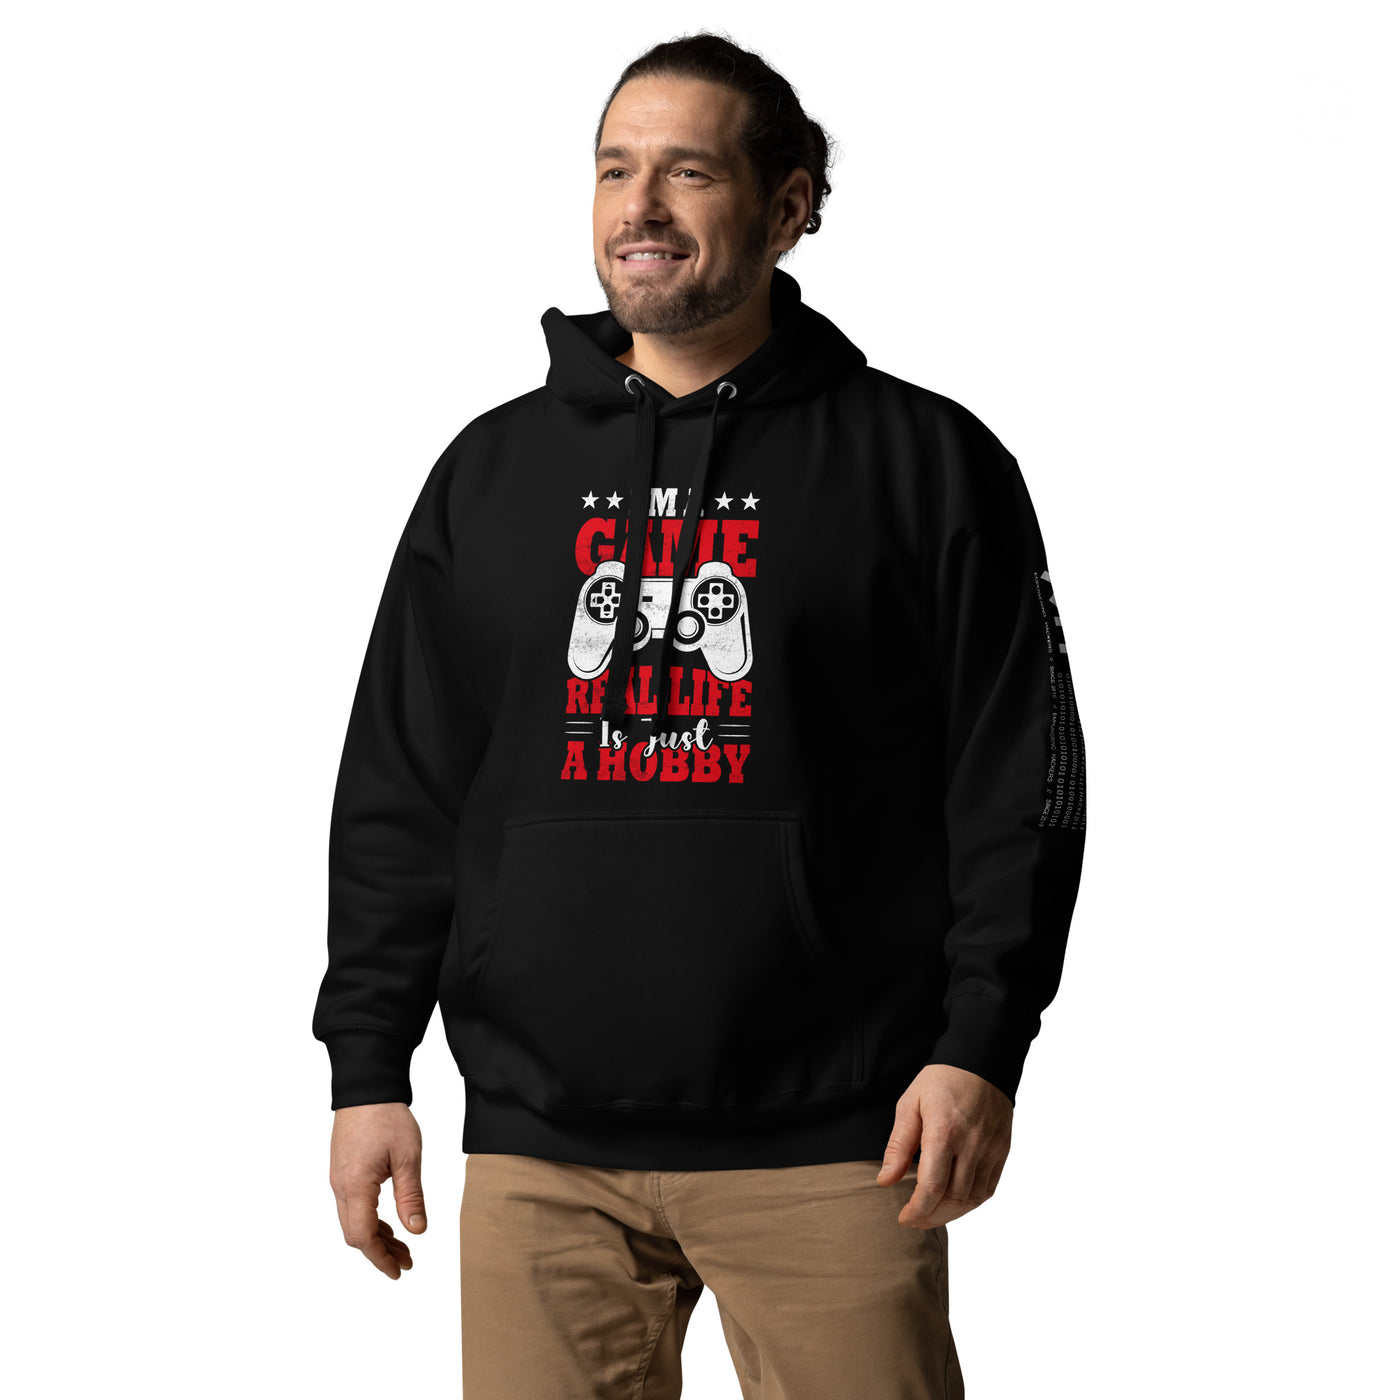 I am a Game; Real life is just a Hobby - Unisex Hoodie